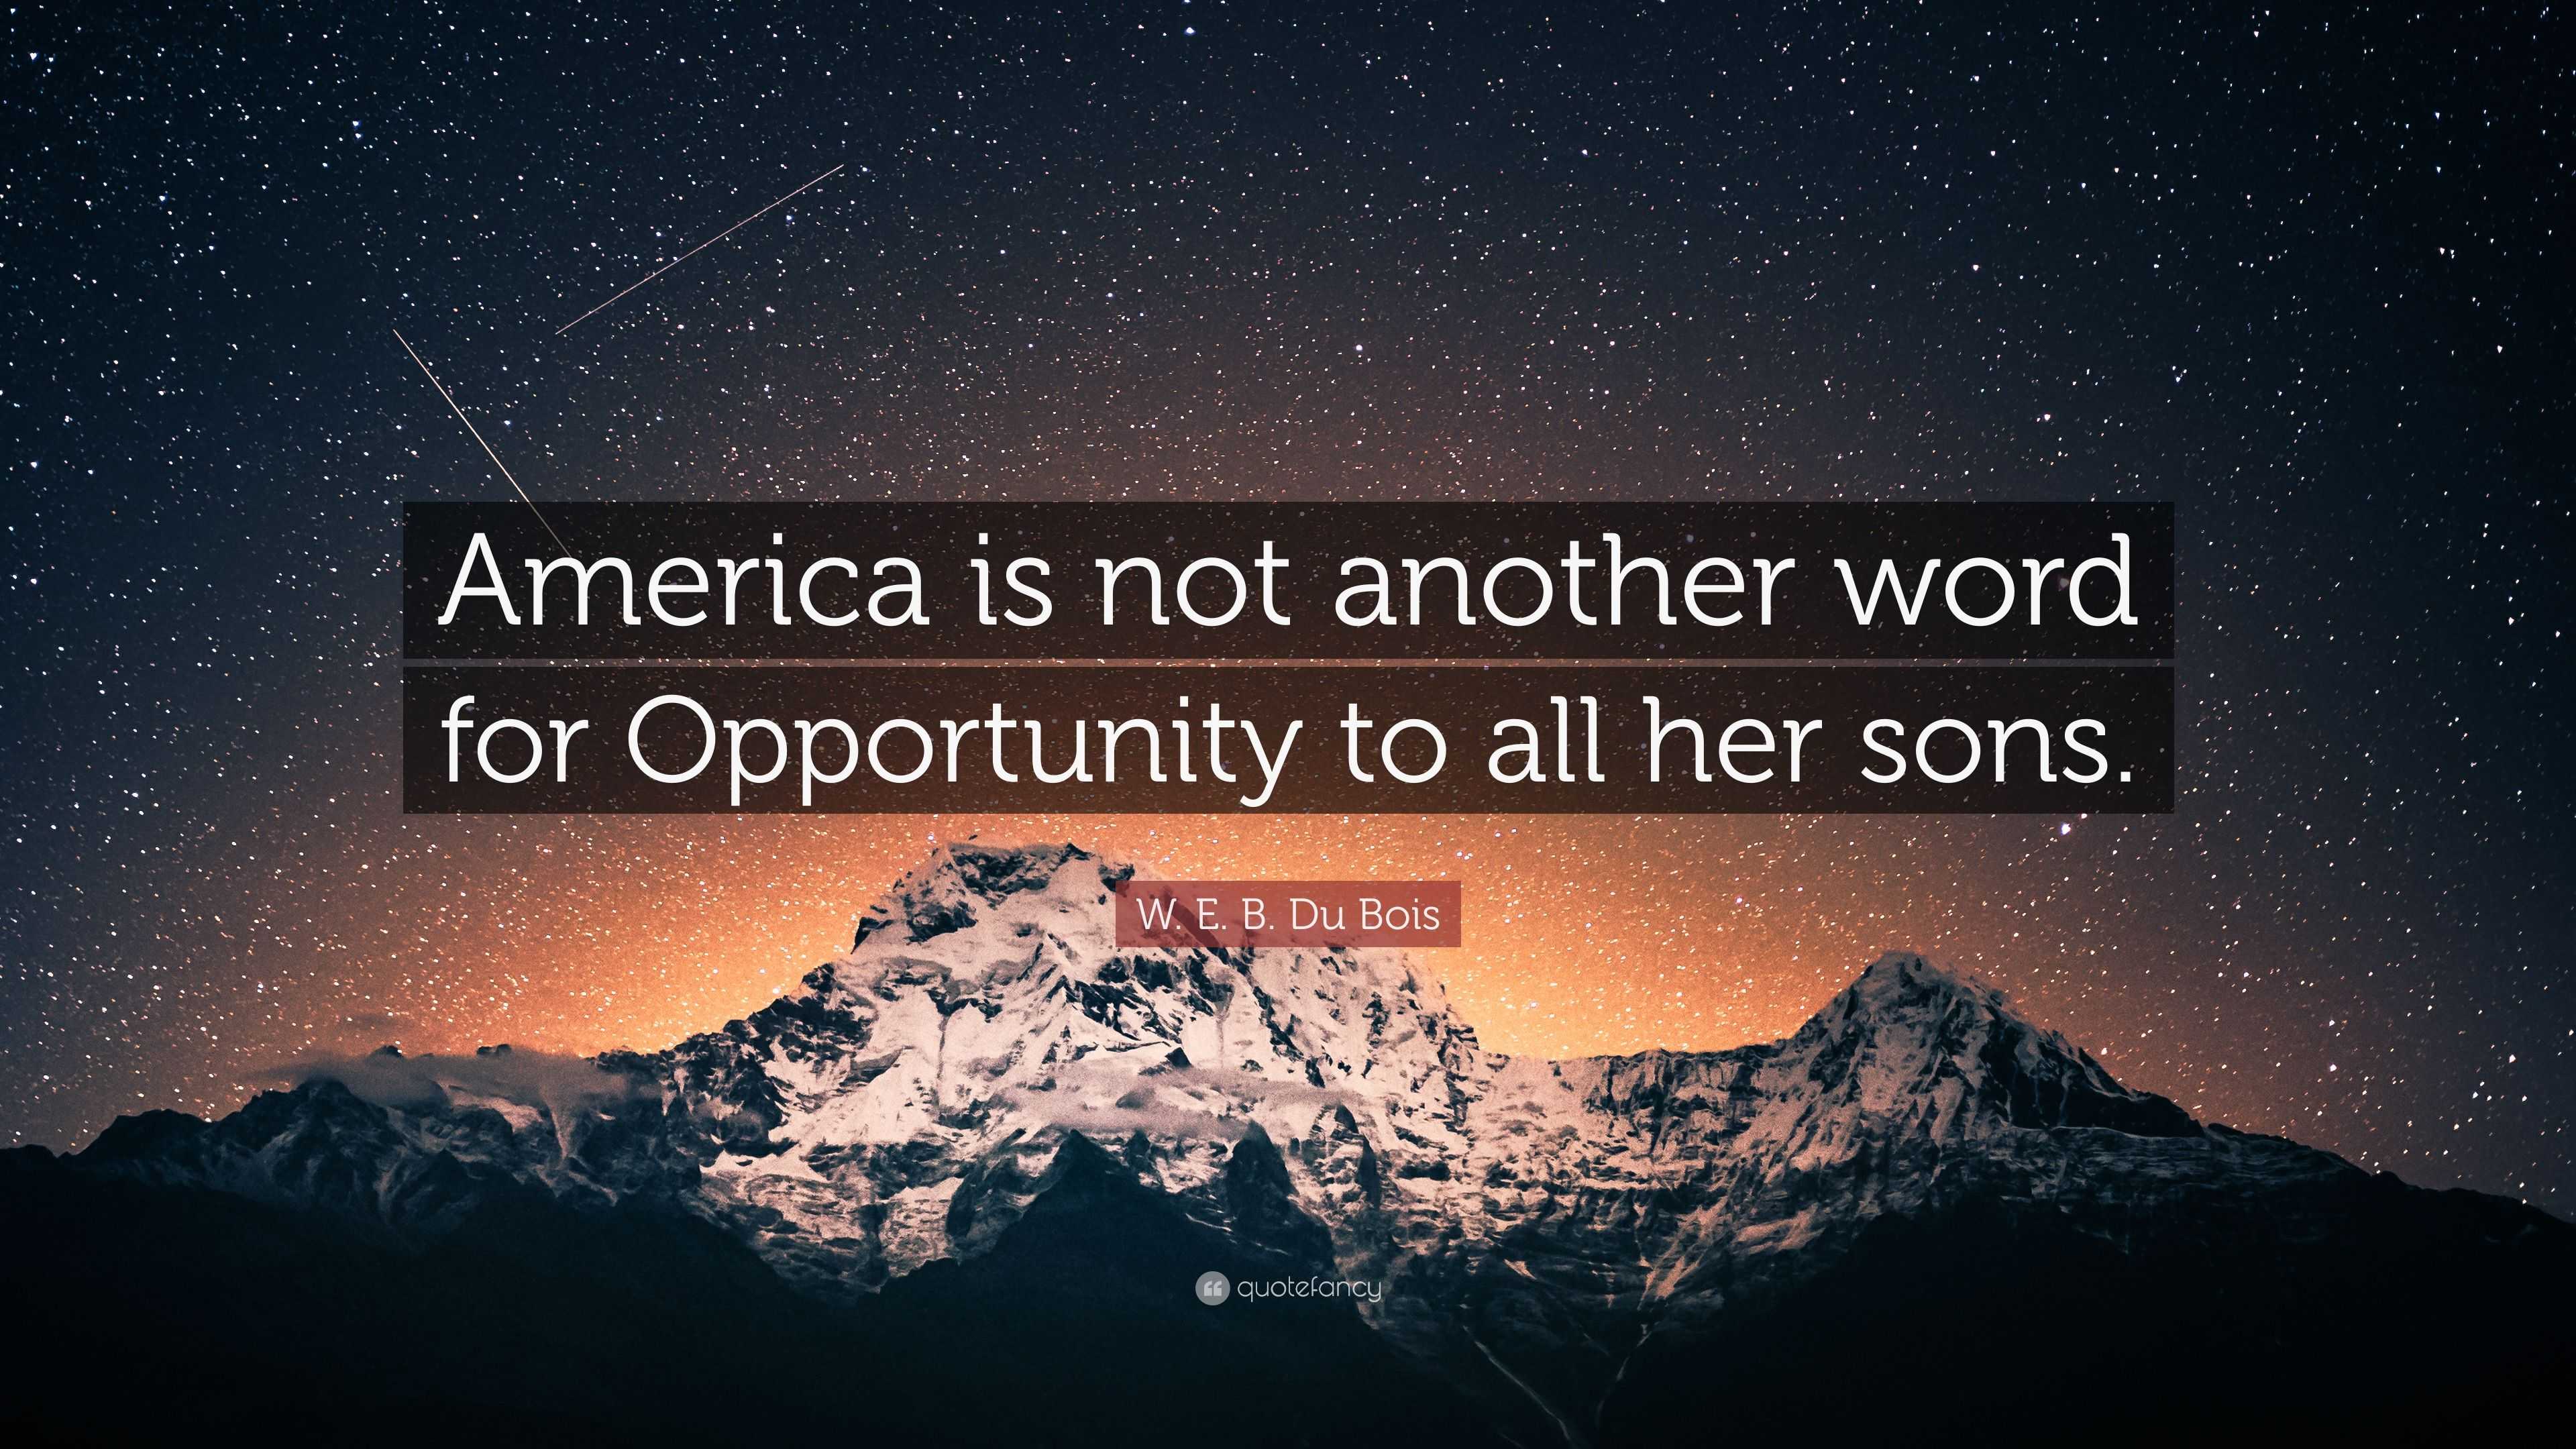 W E B Du Bois Quote America Is Not Another Word For Opportunity To All Her Sons